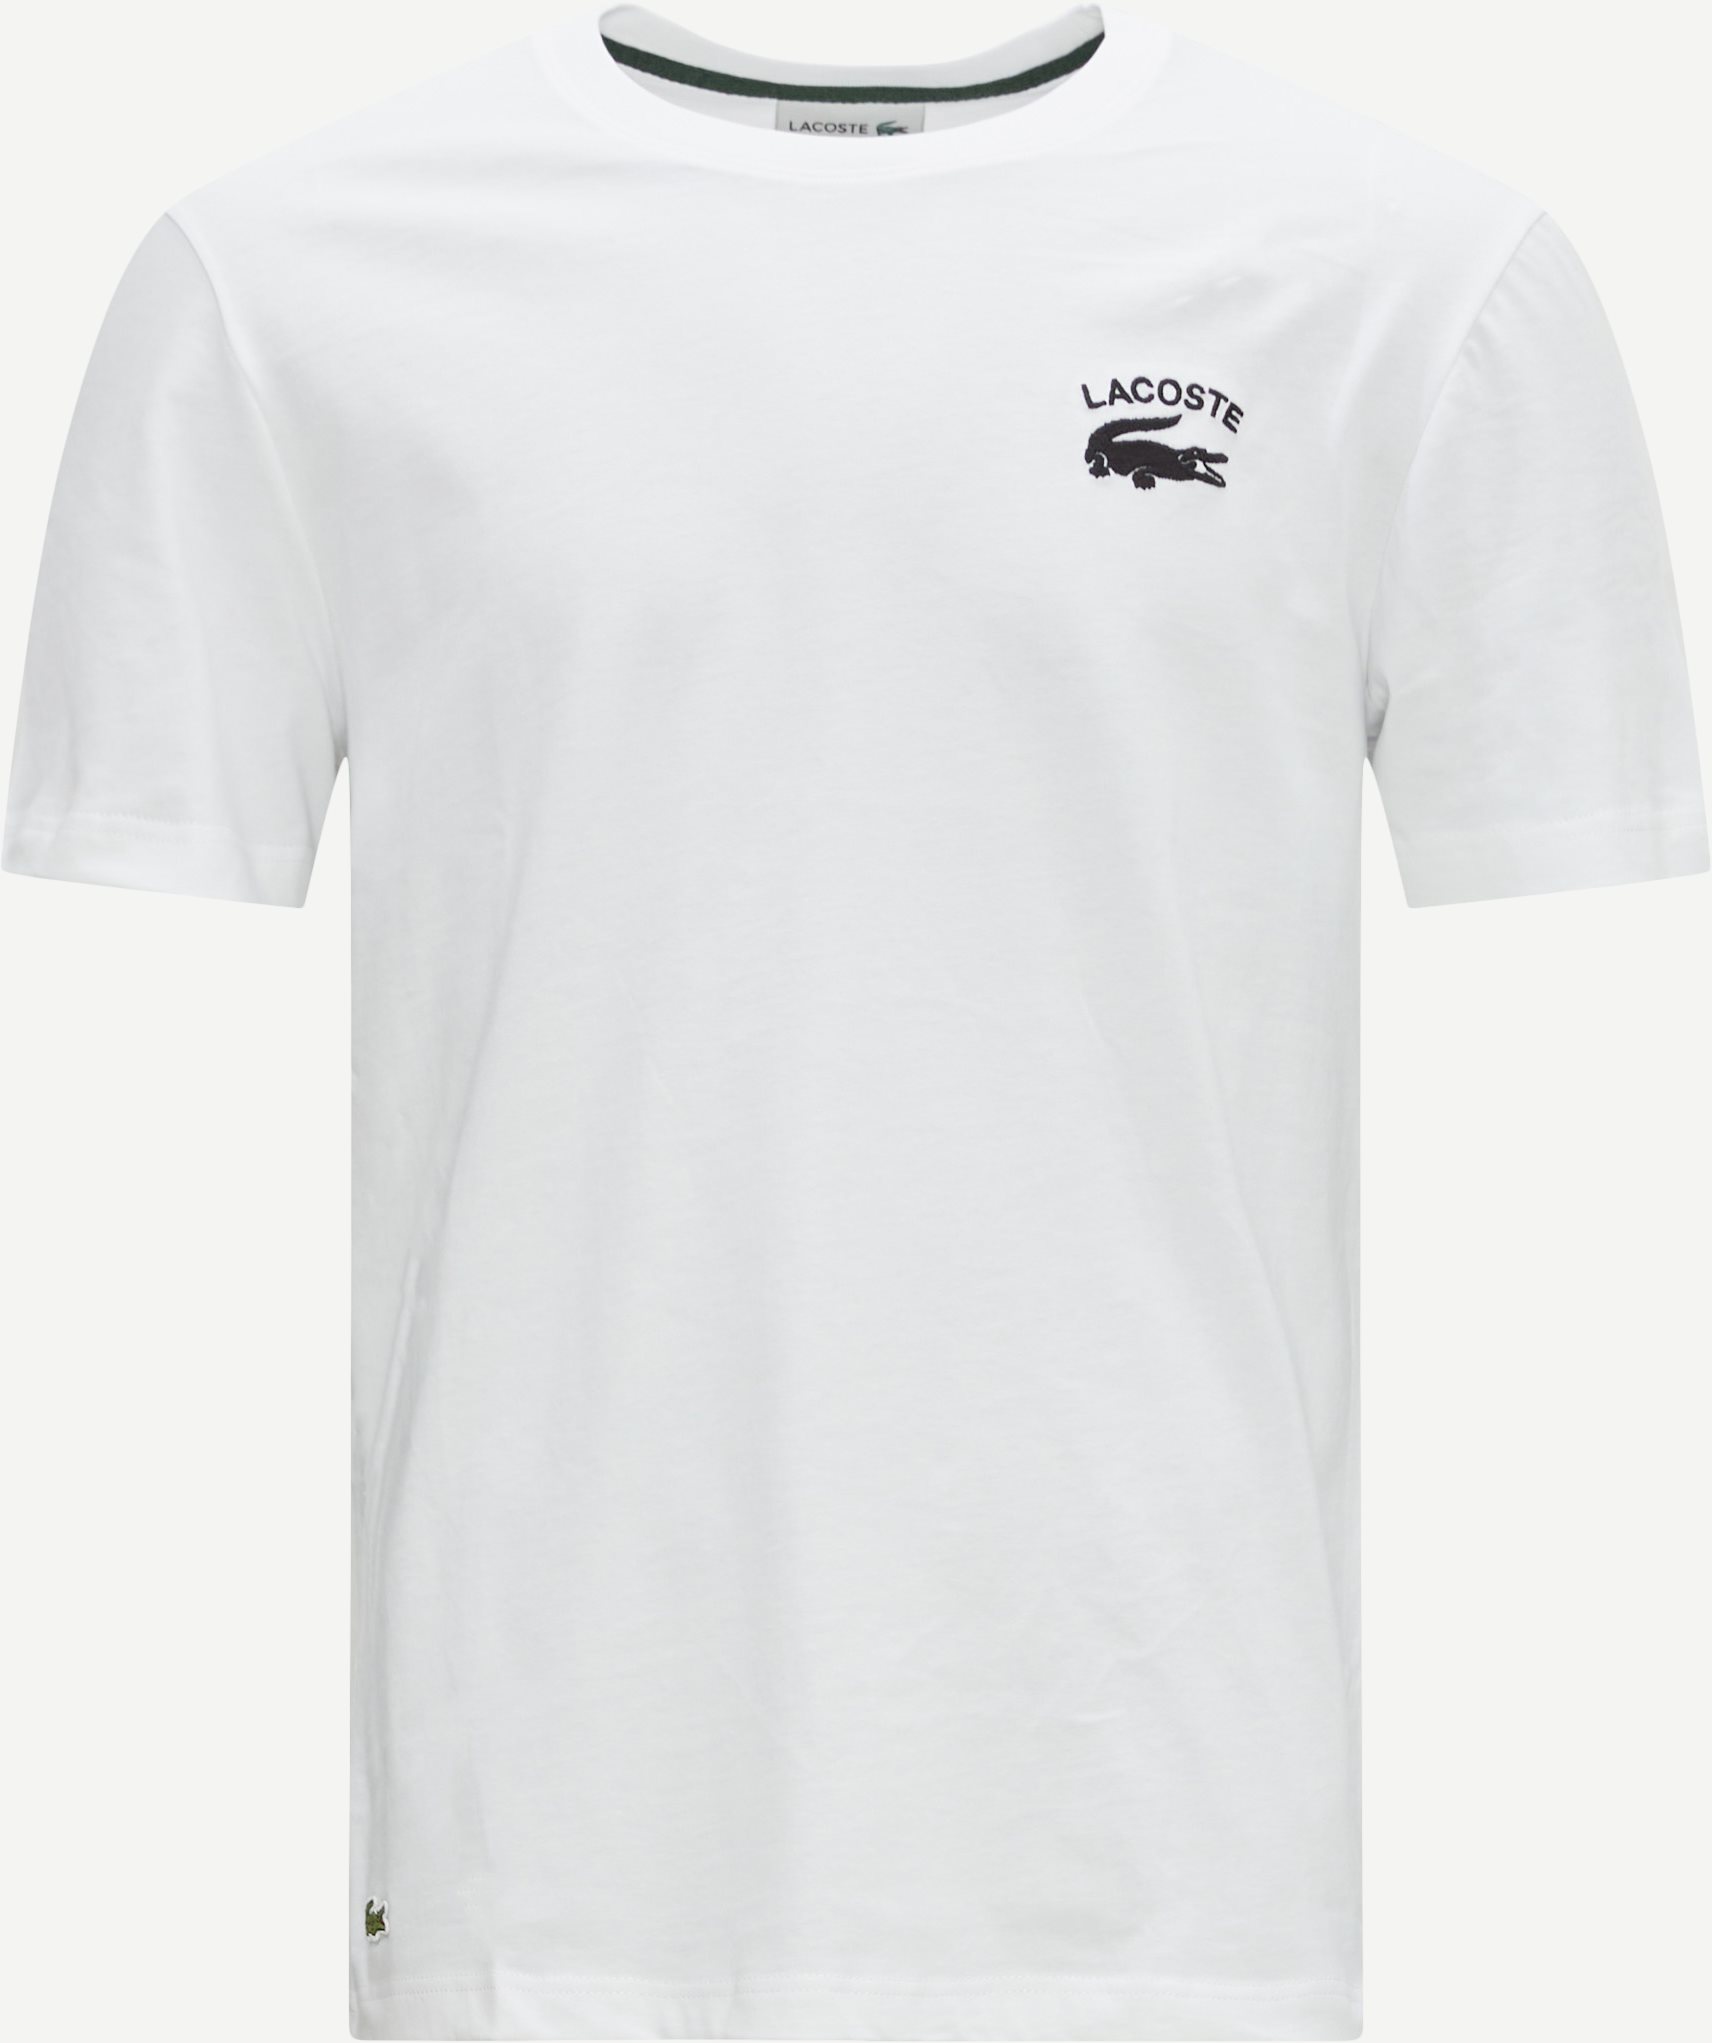 Lacoste T-shirts TH9665 White